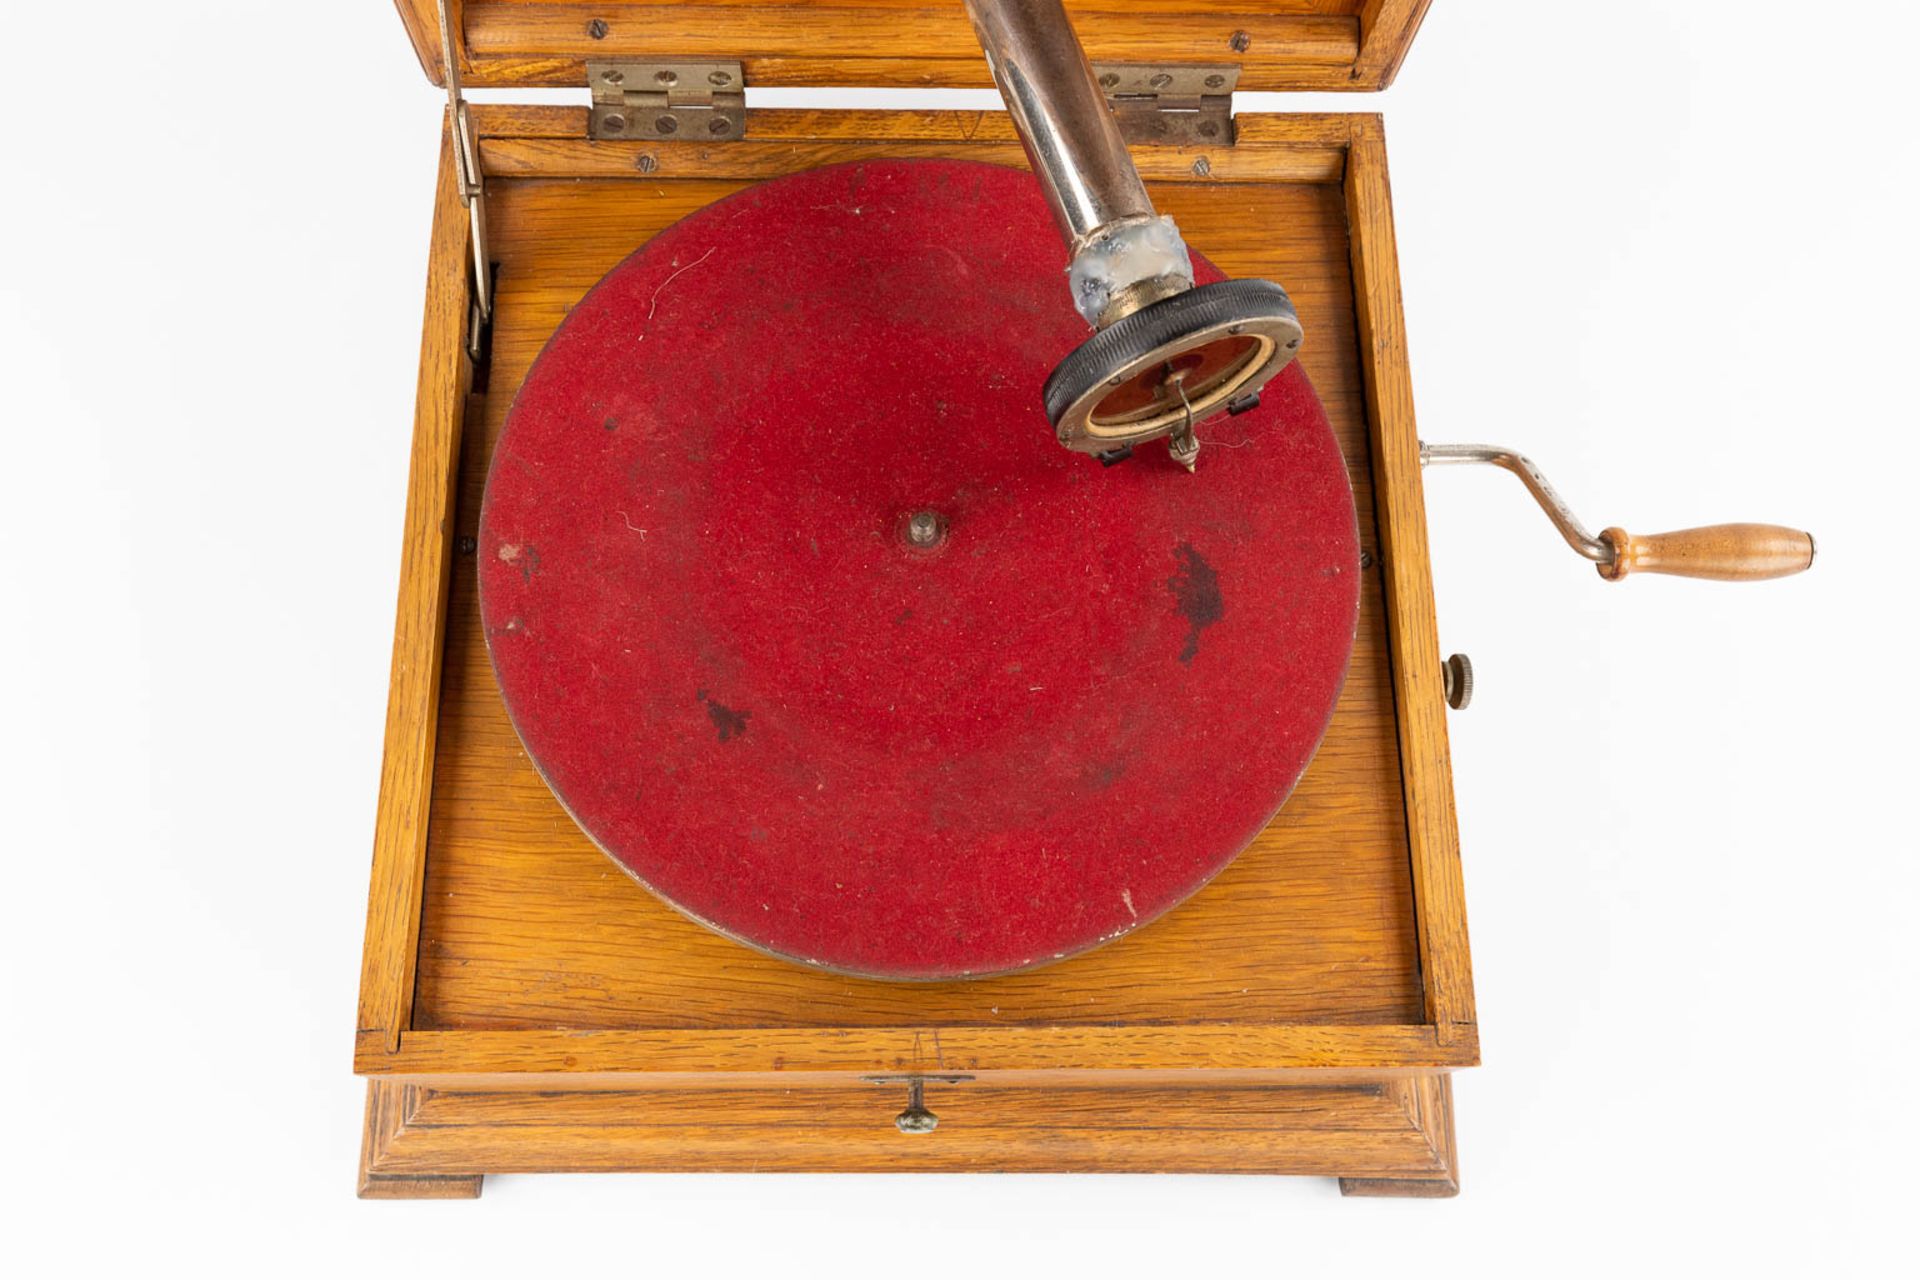 Pathé, a grammophone with bakelite records. The first half of the 20th C. (D:35 x W:35 x H:30 cm) - Image 10 of 16